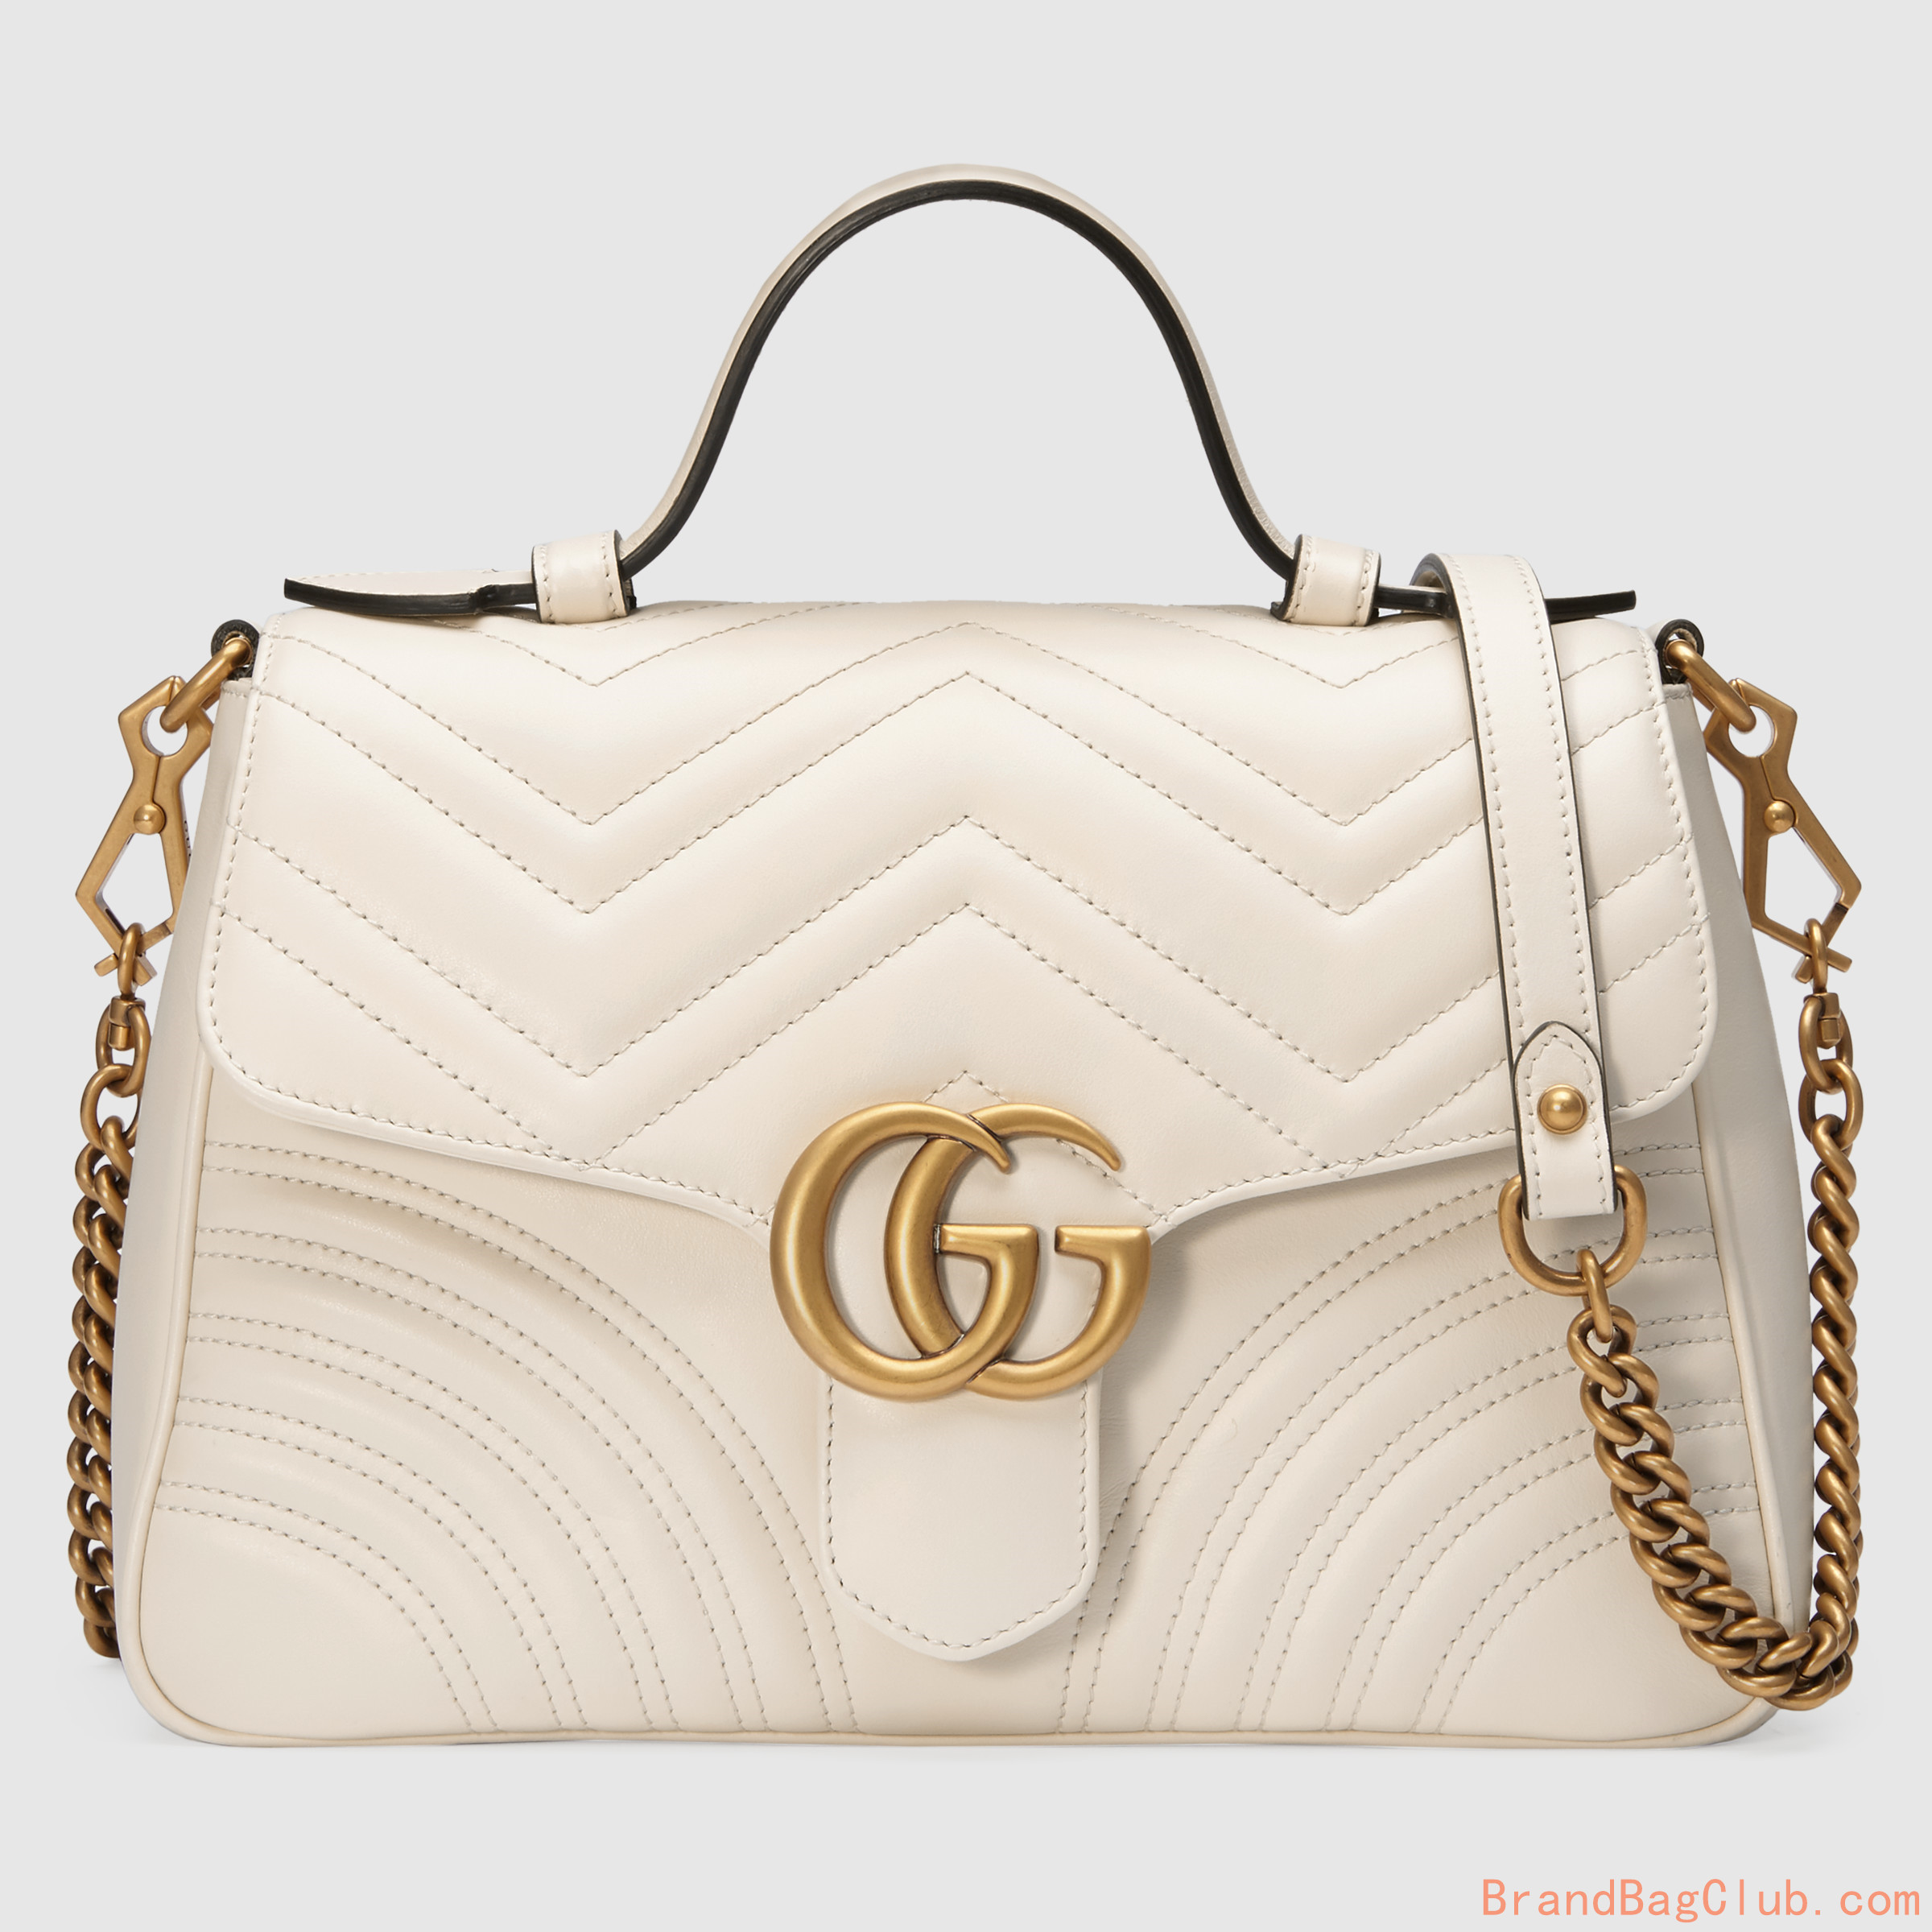  Gucci  bag sale  outlet  online shop GG Marmont small top 